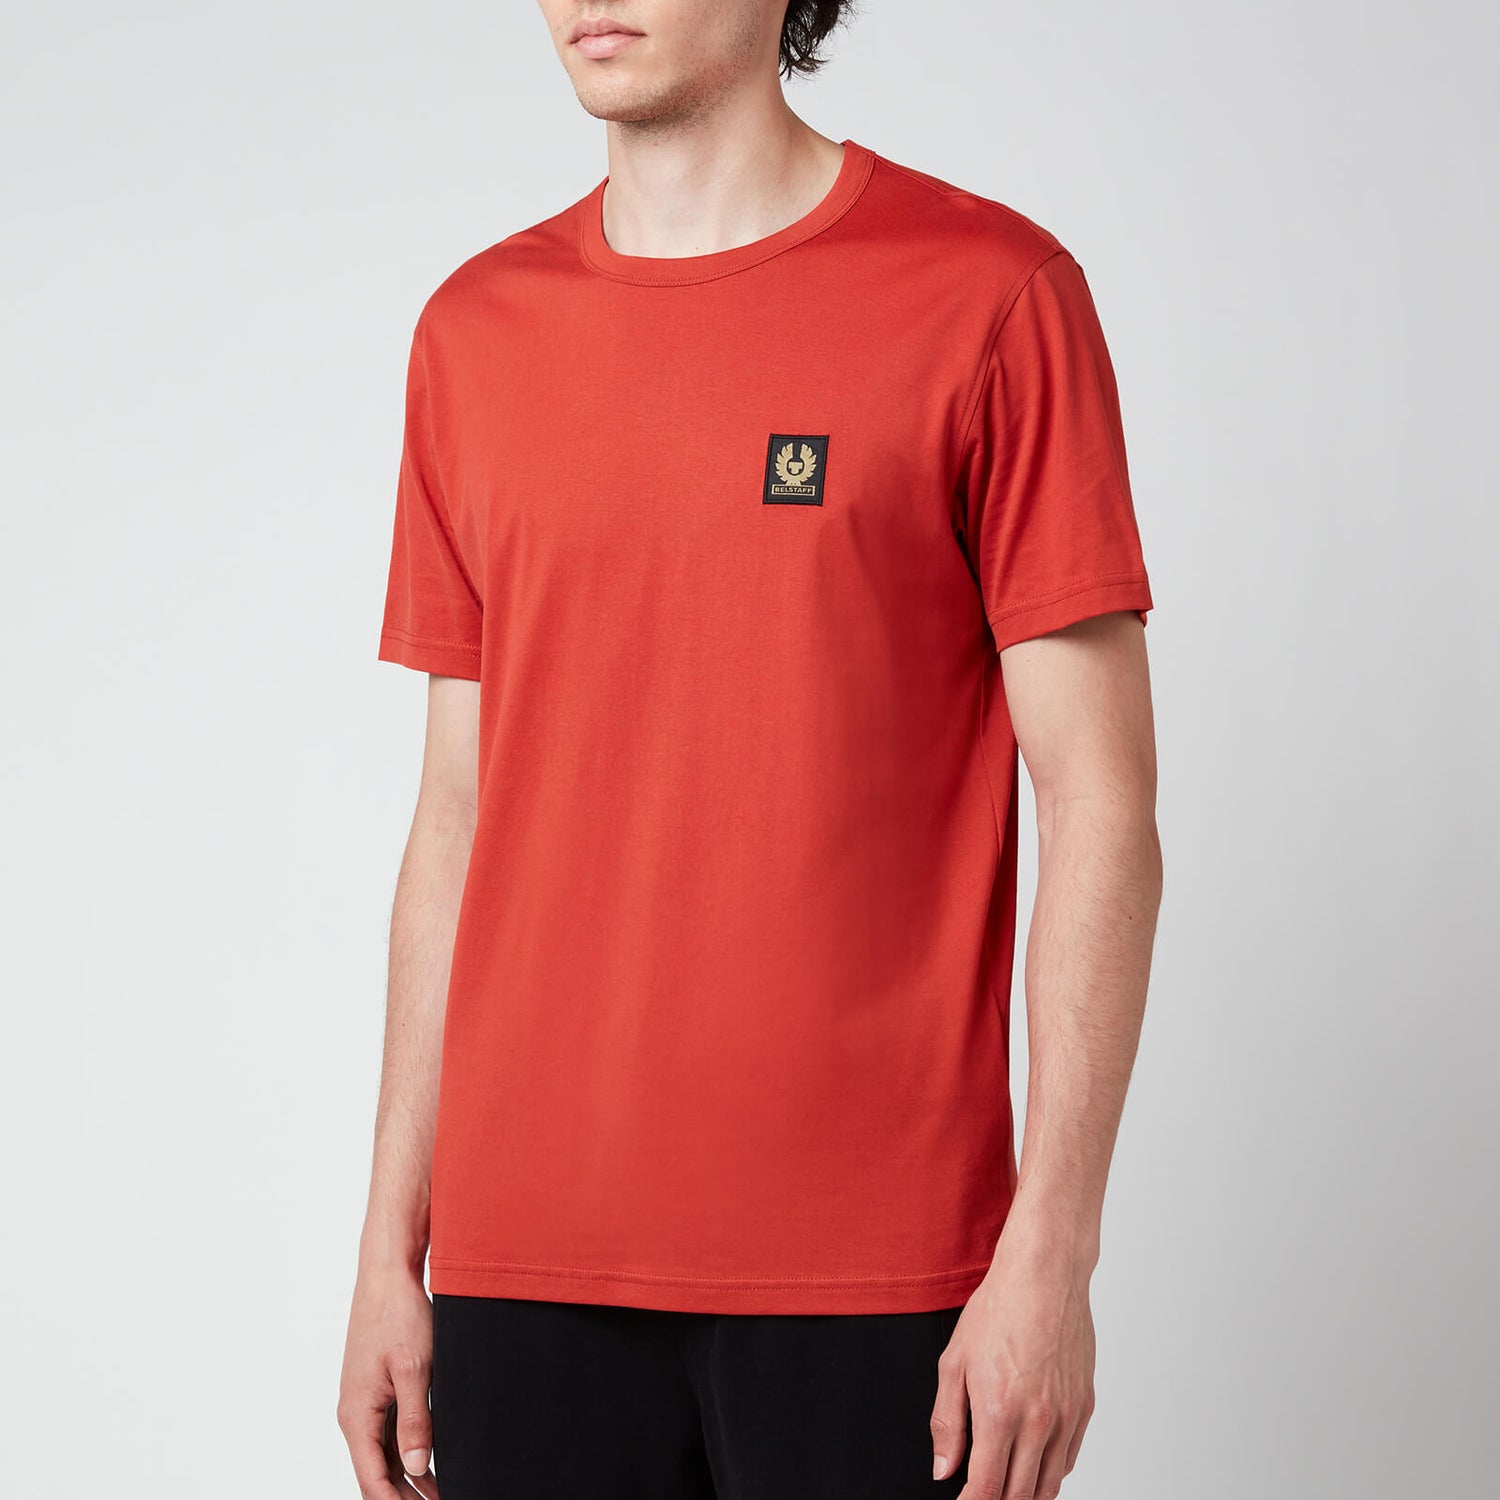 Belstaff Men's Patch Logo T-Shirt - Red Ochre - Free UK Delivery Available